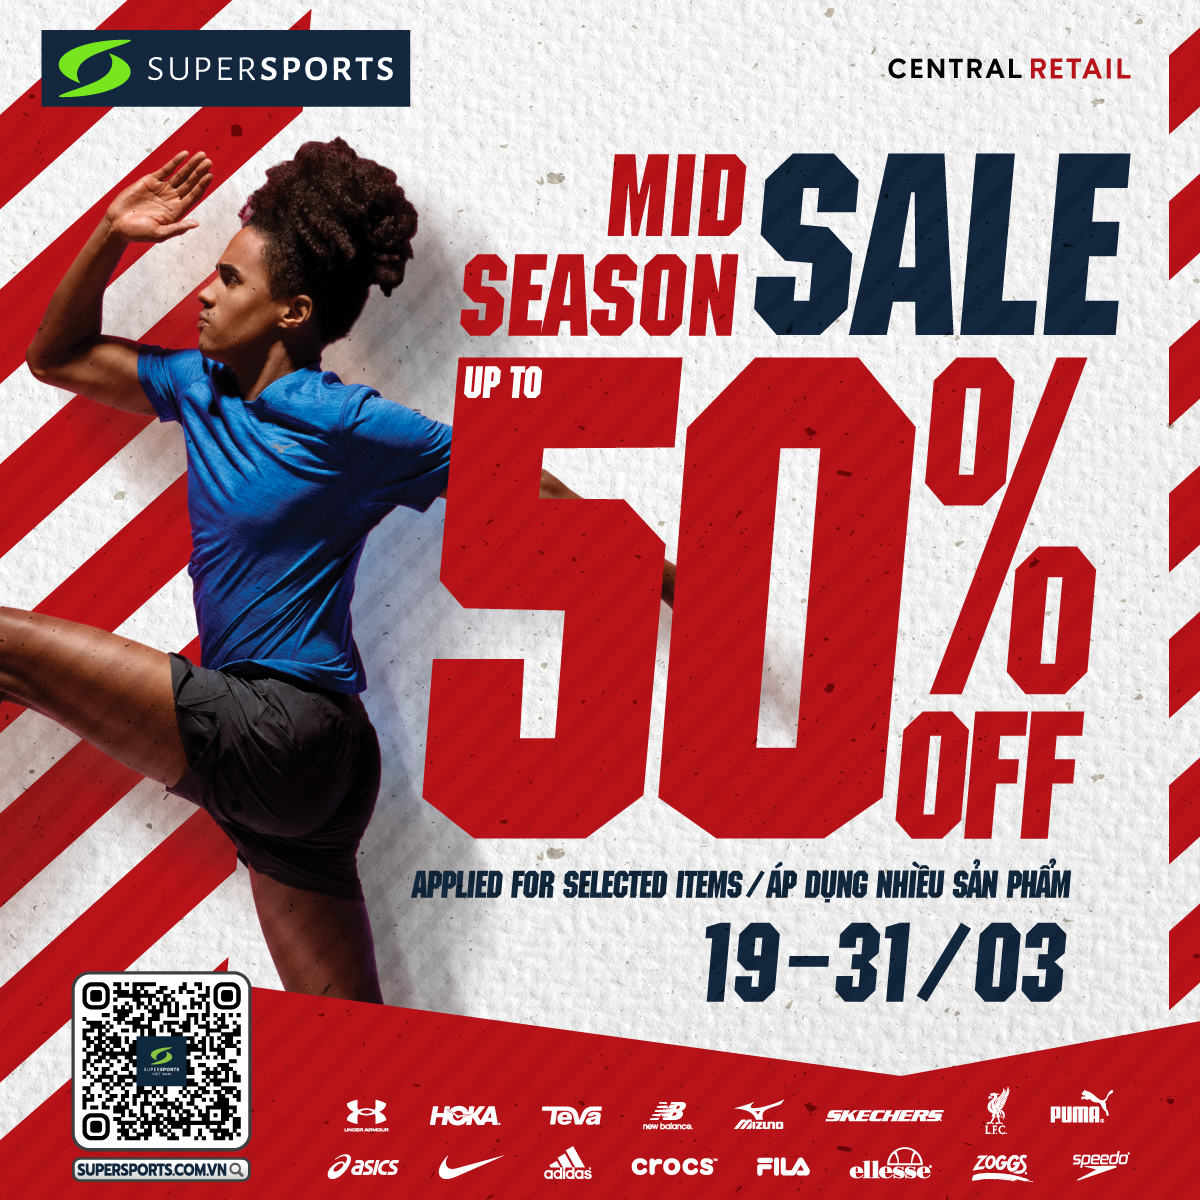 MID-SEASON SALE UP TO 50% UP AT SUPERSPORTS🎉